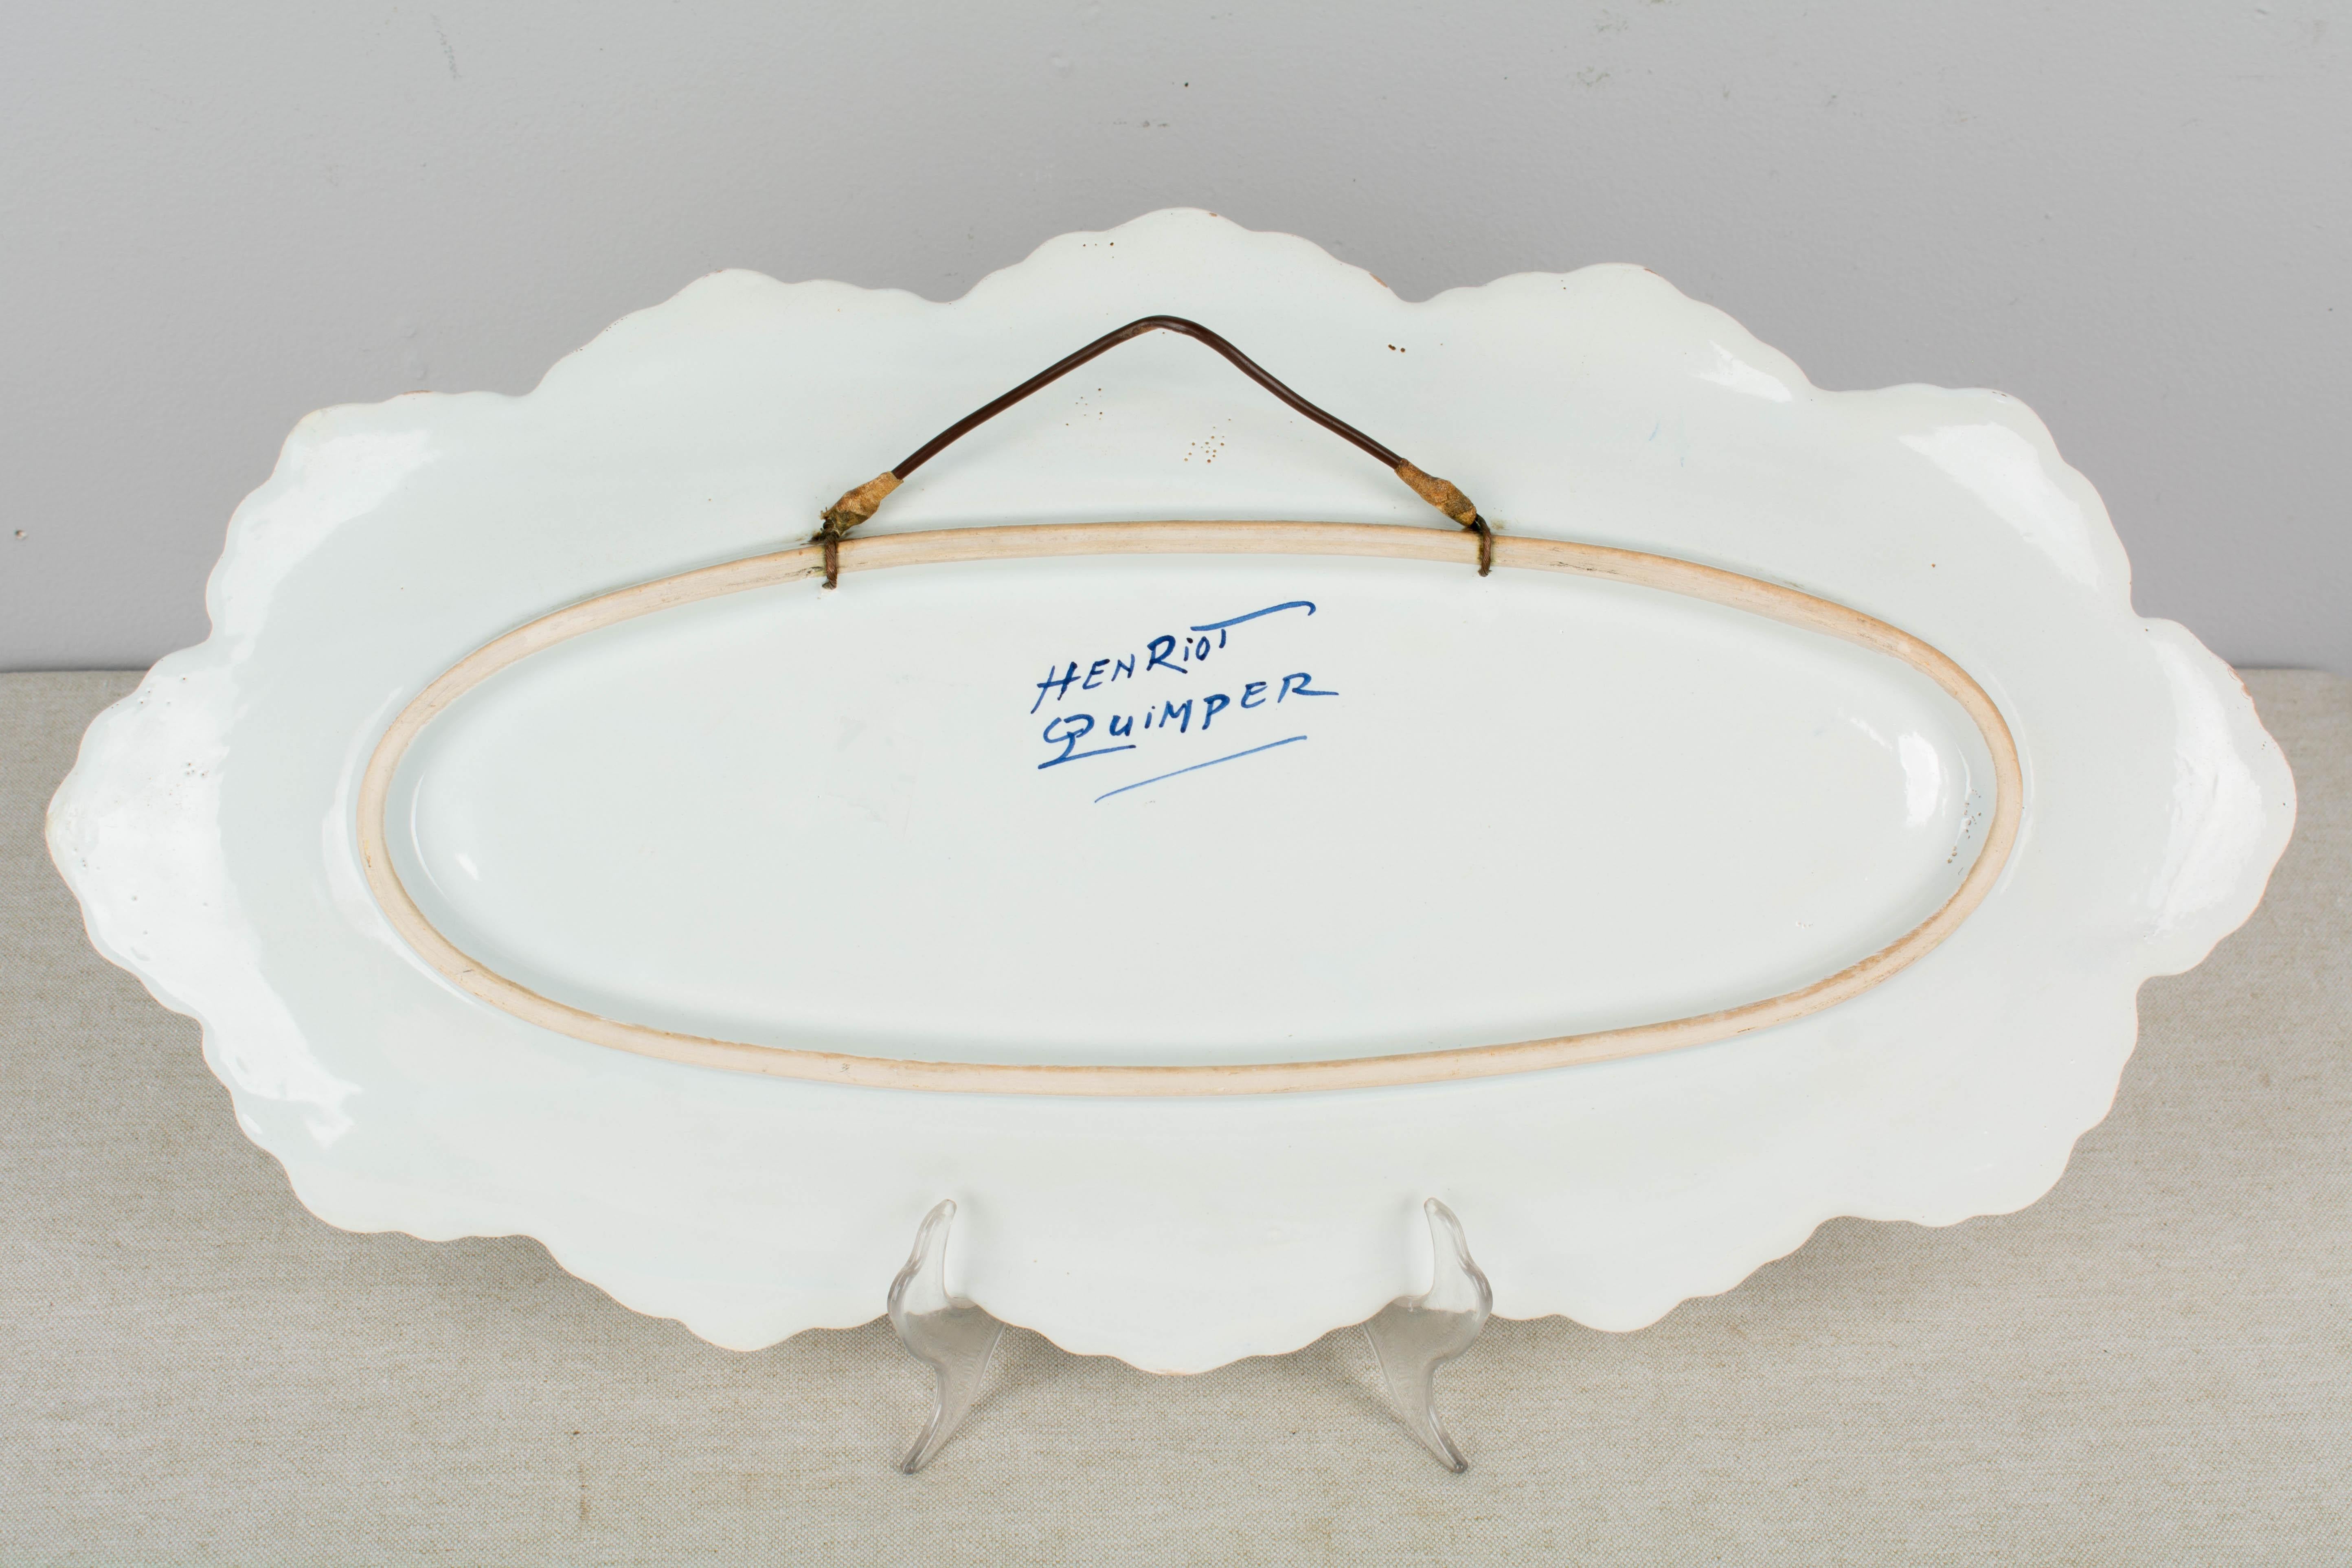 French Henriot Quimper Faience Platter In Good Condition For Sale In Winter Park, FL